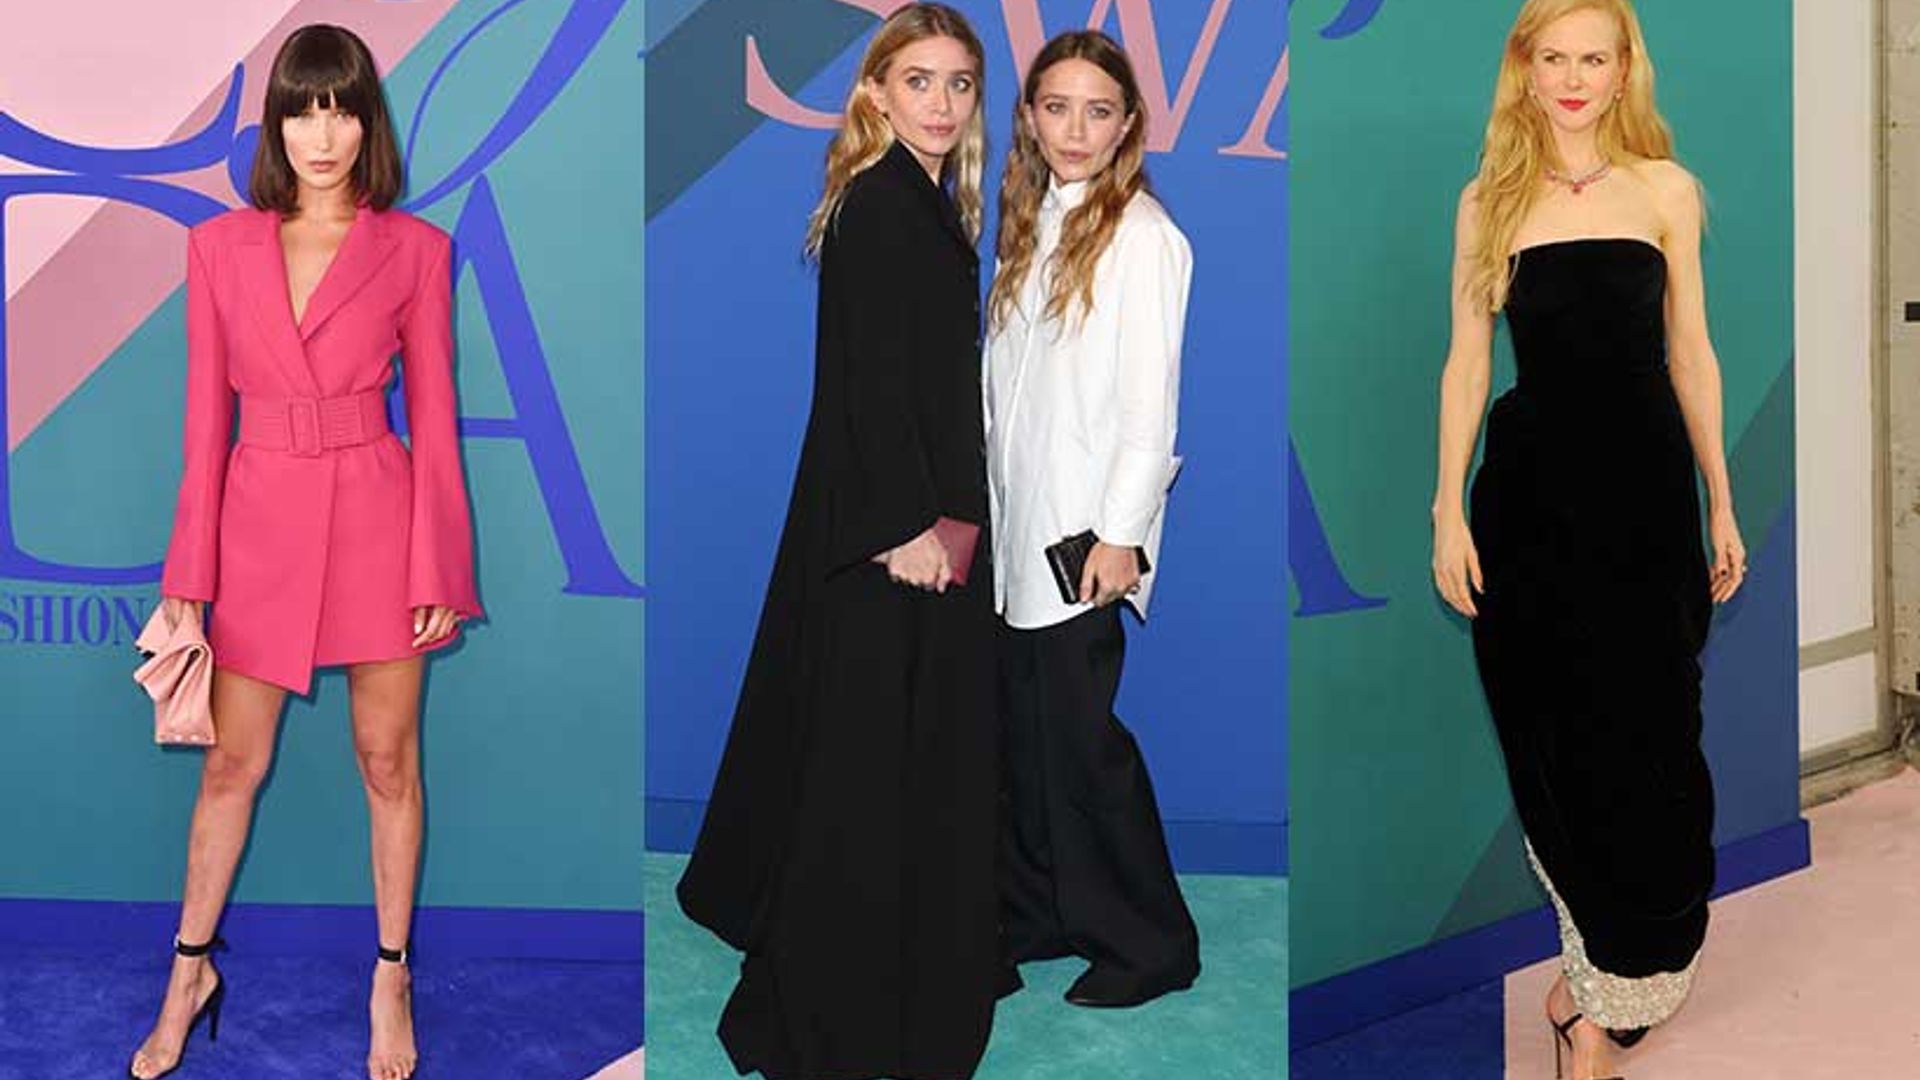 CFDA Awards 2017: The best celebrity red carpet looks